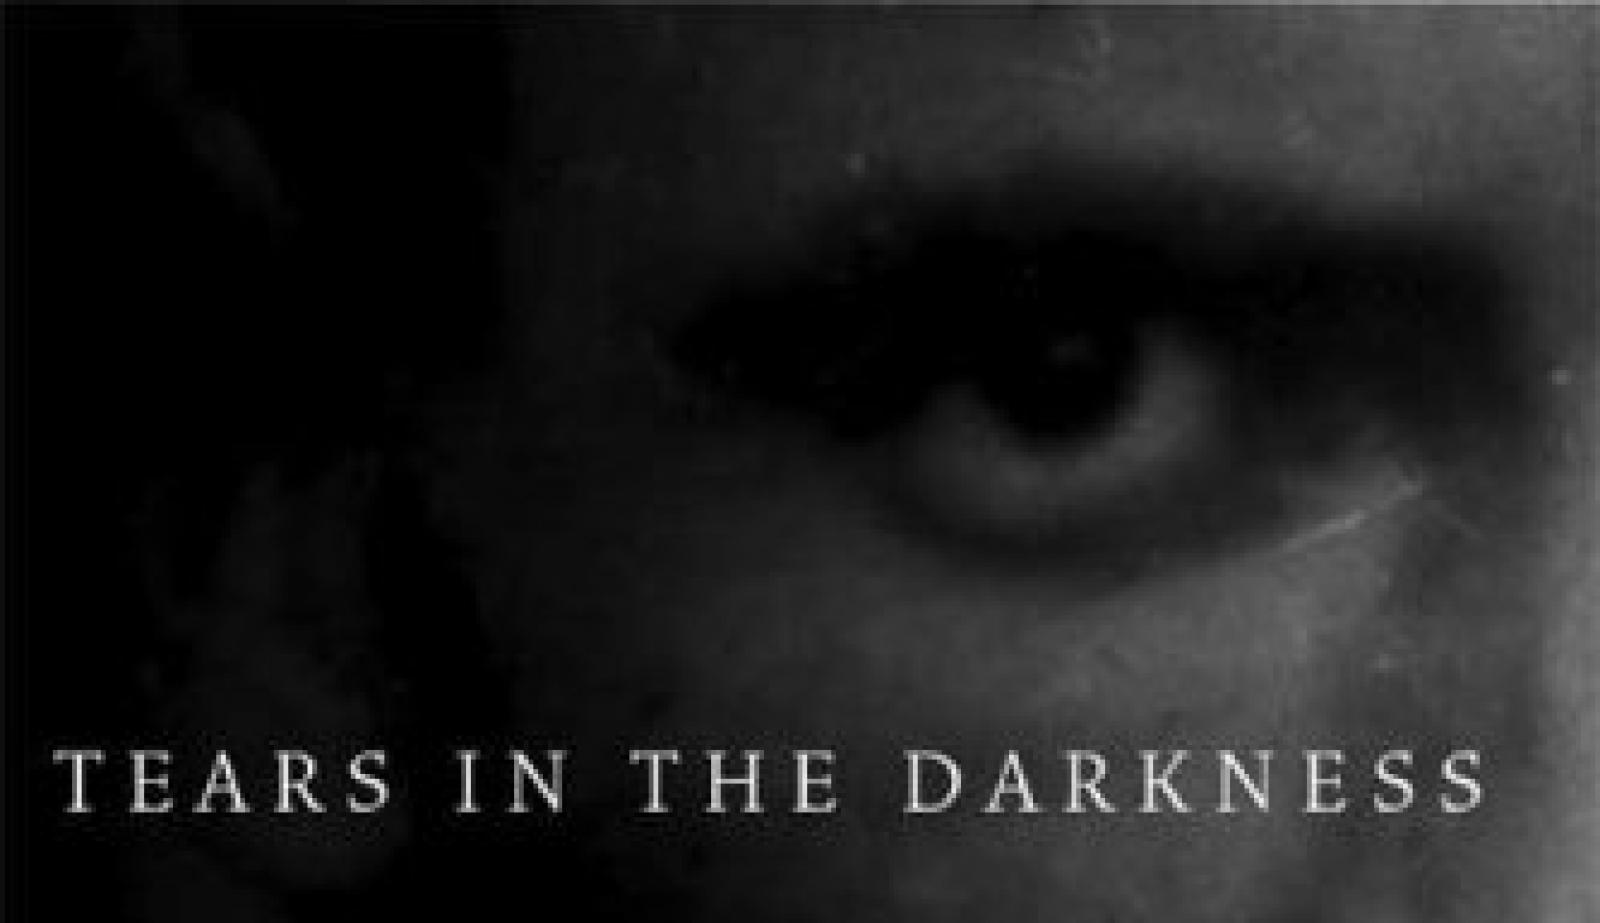 Tears in the Darkness by Michael Norman and Elizabeth M. Norman